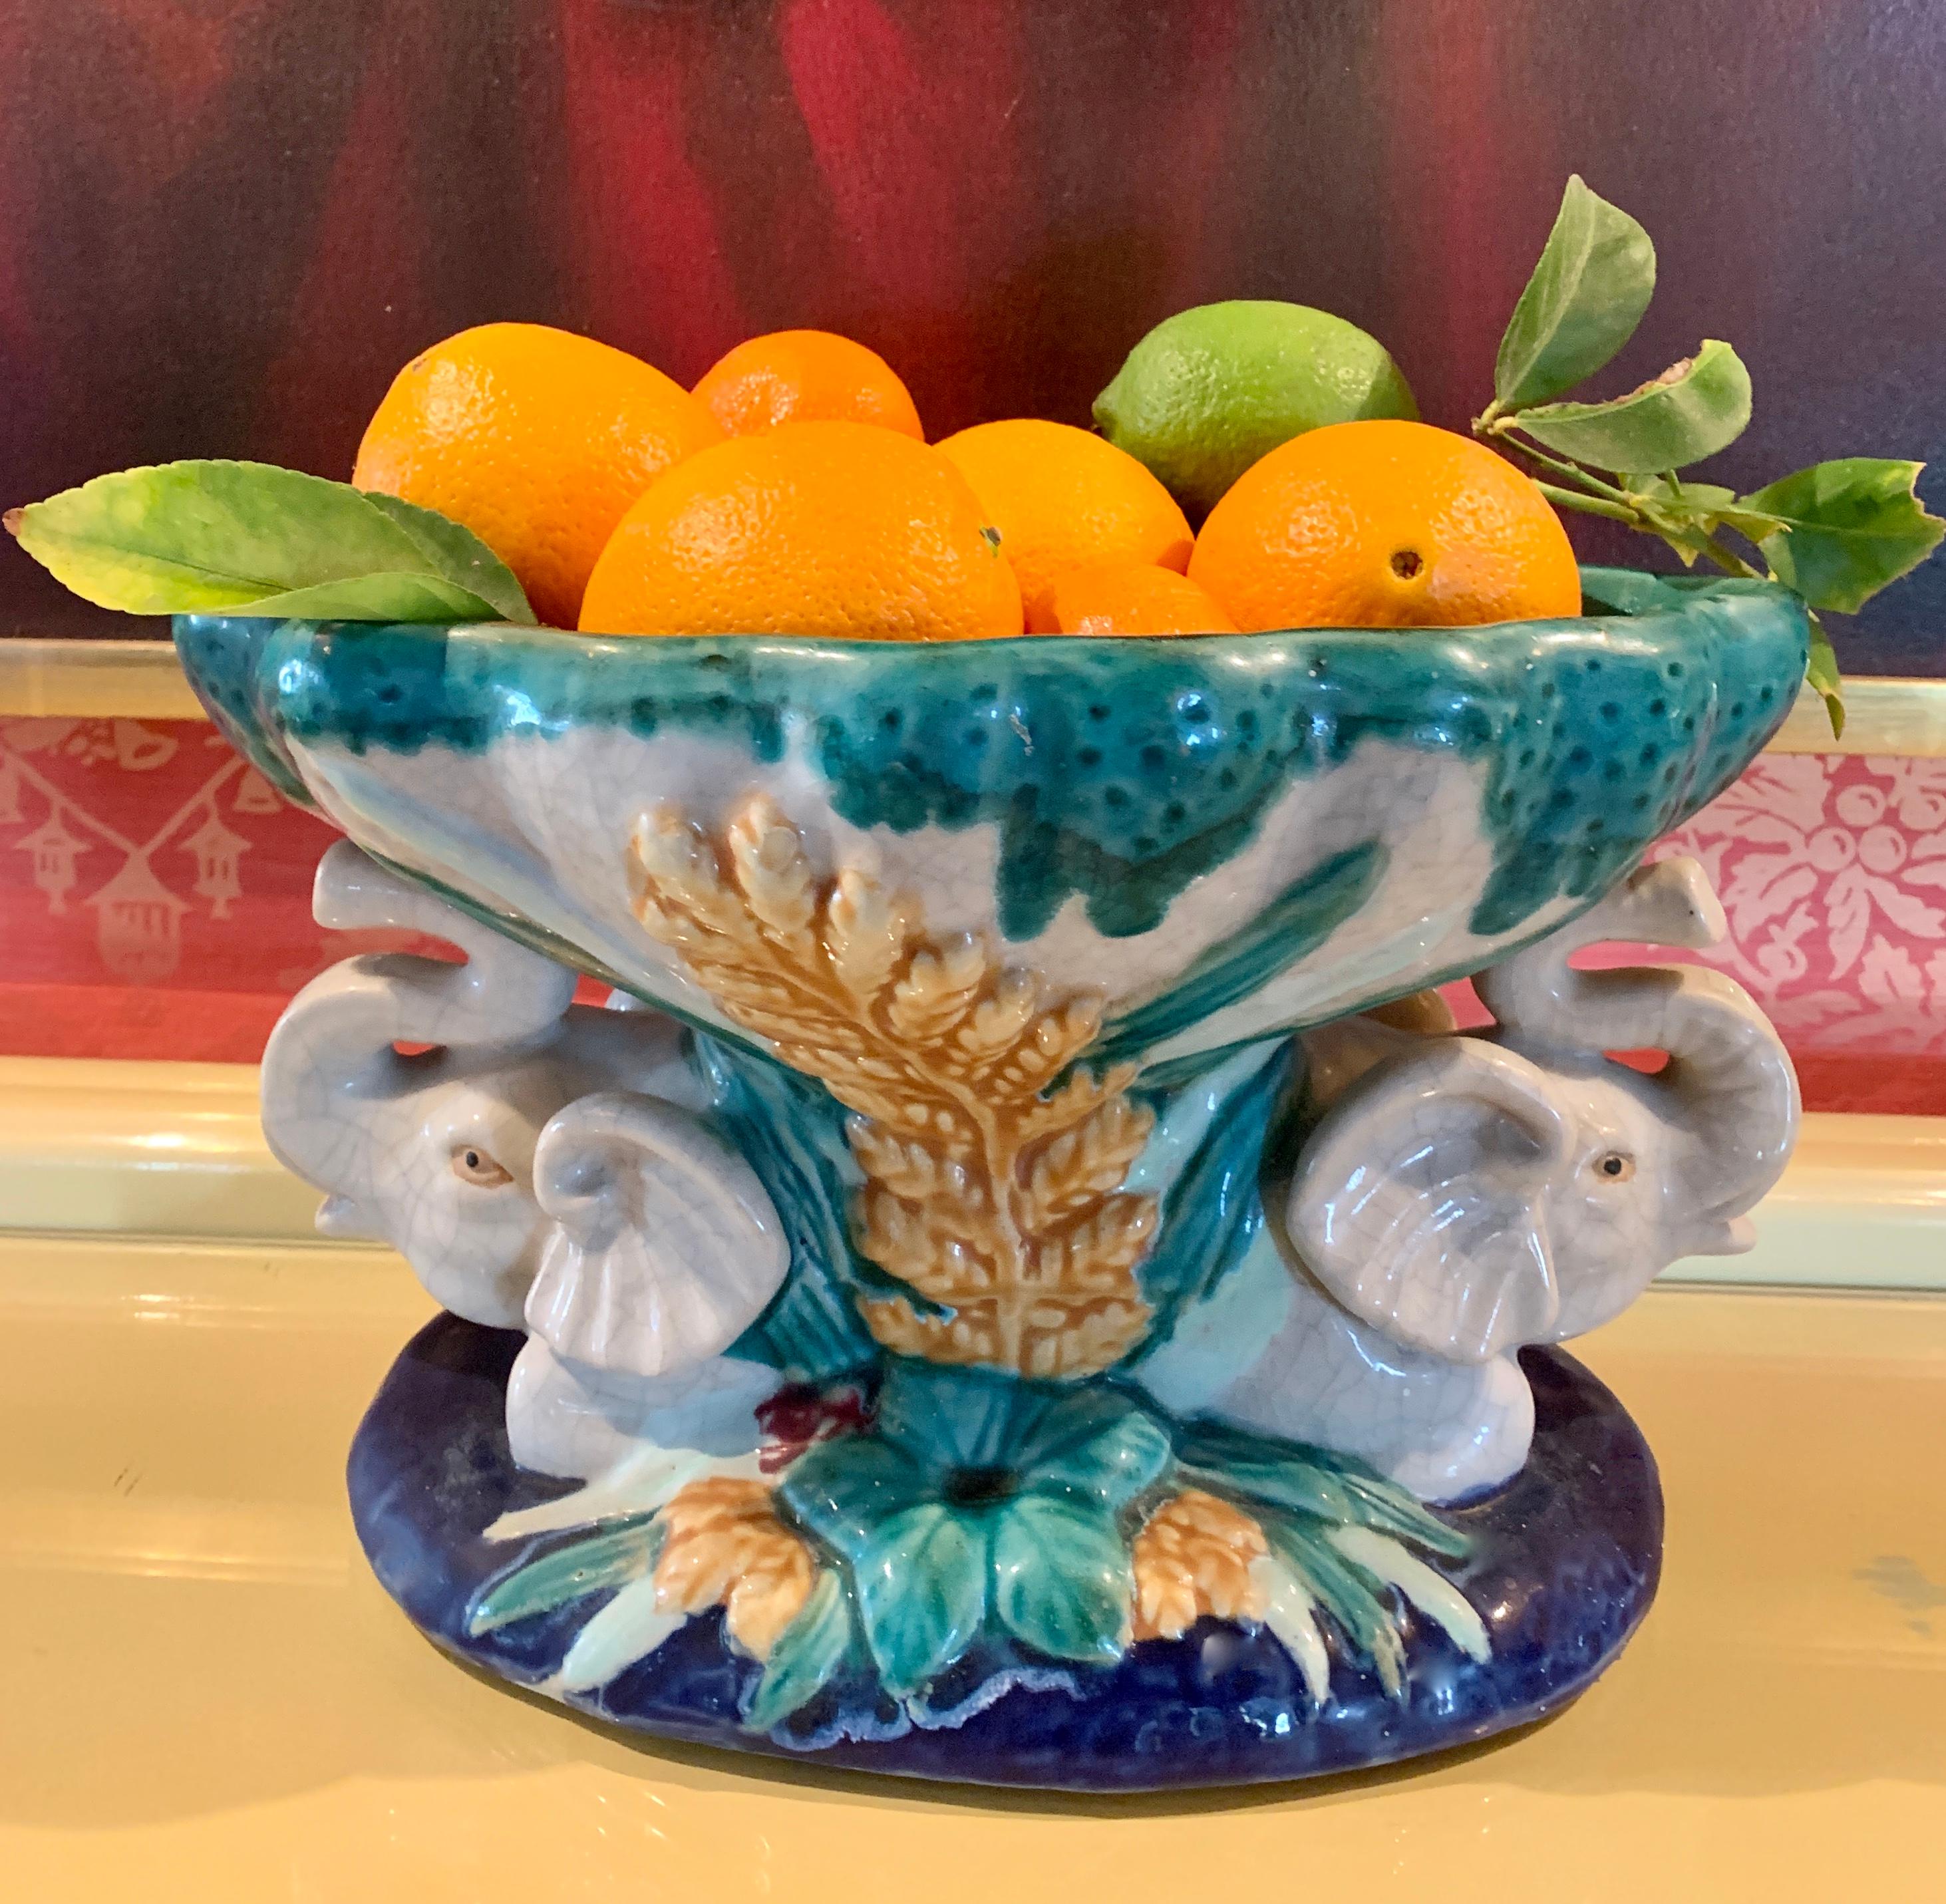 Italian Majolica bowl with elephants - A wonderful pair of elephants with their trunks up... double the good luck! Vibrant colors and details make this piece a great stand alone piece or perfect for the kitchen island or centerpiece.